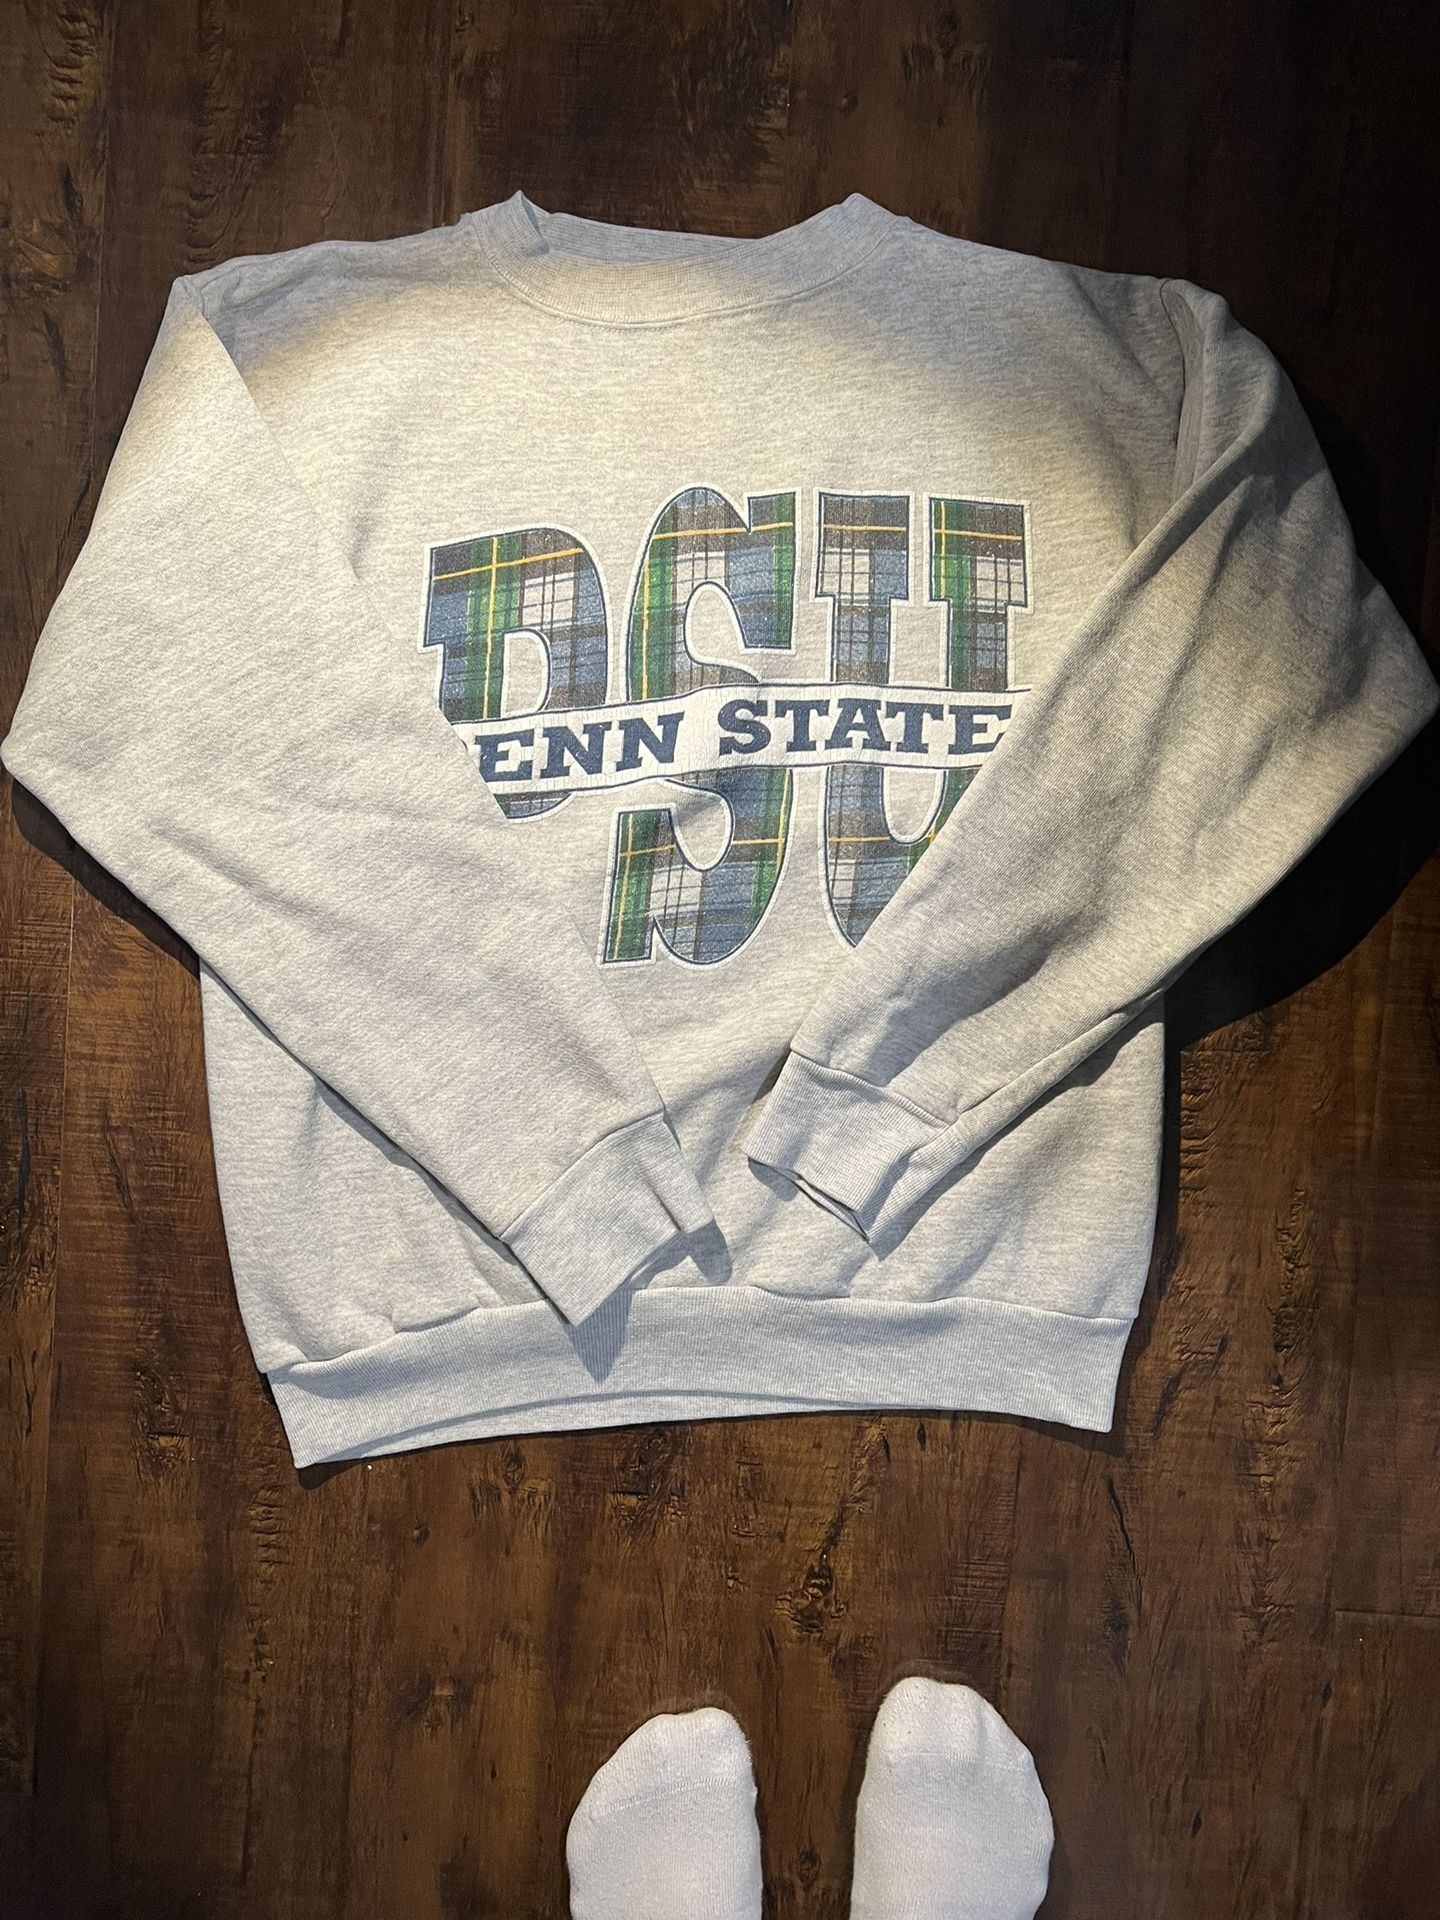 Penn State Sweater - Size S